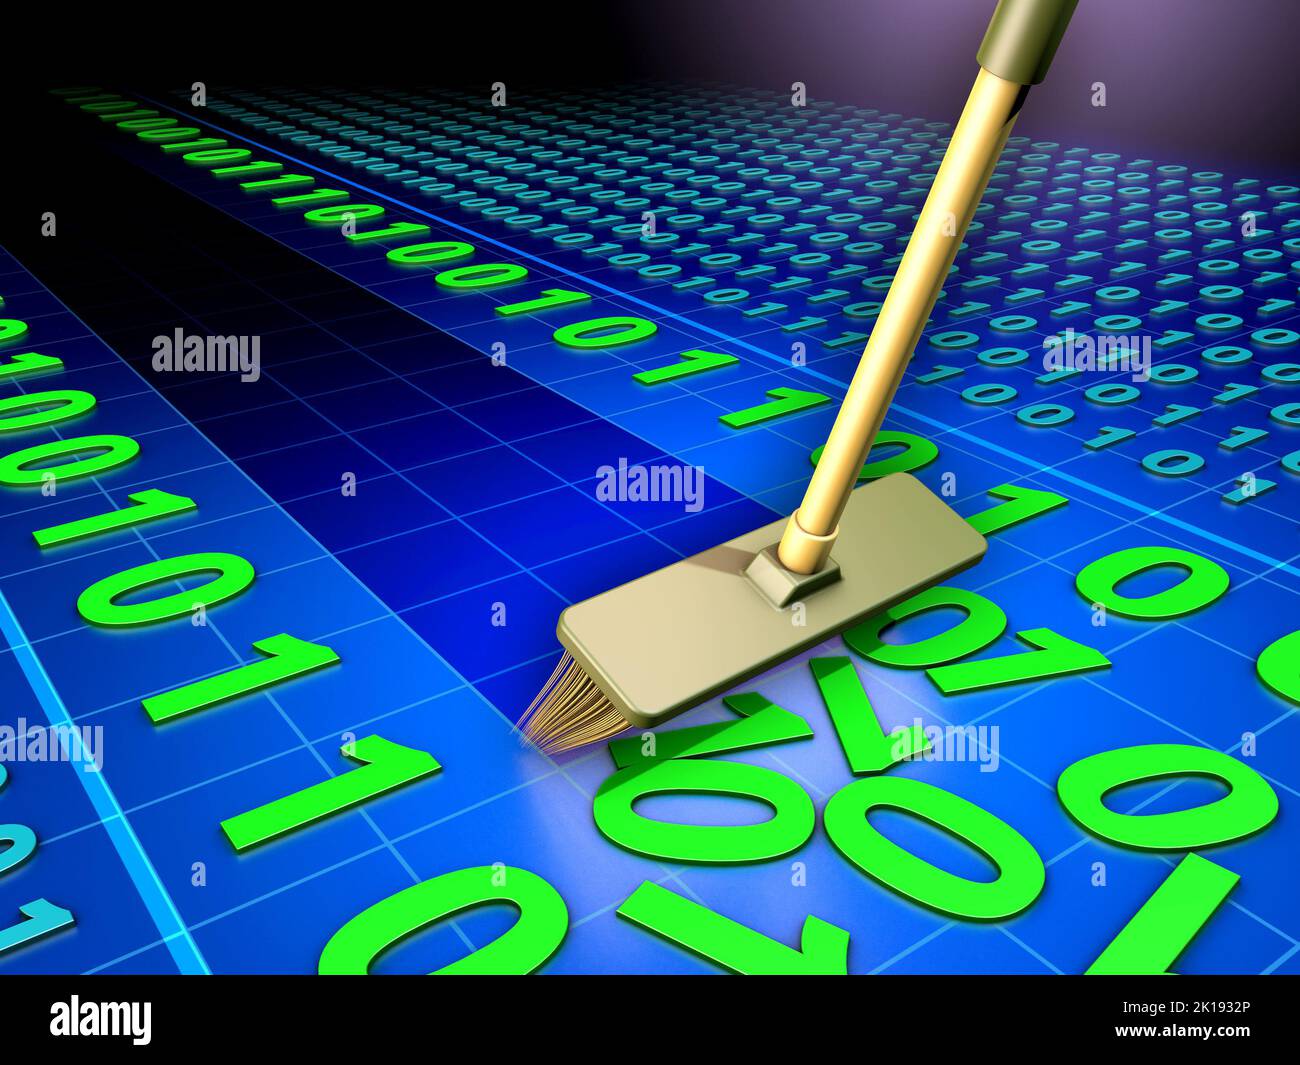 Cleaning some binary code using a broom. Digital illustration. Stock Photo